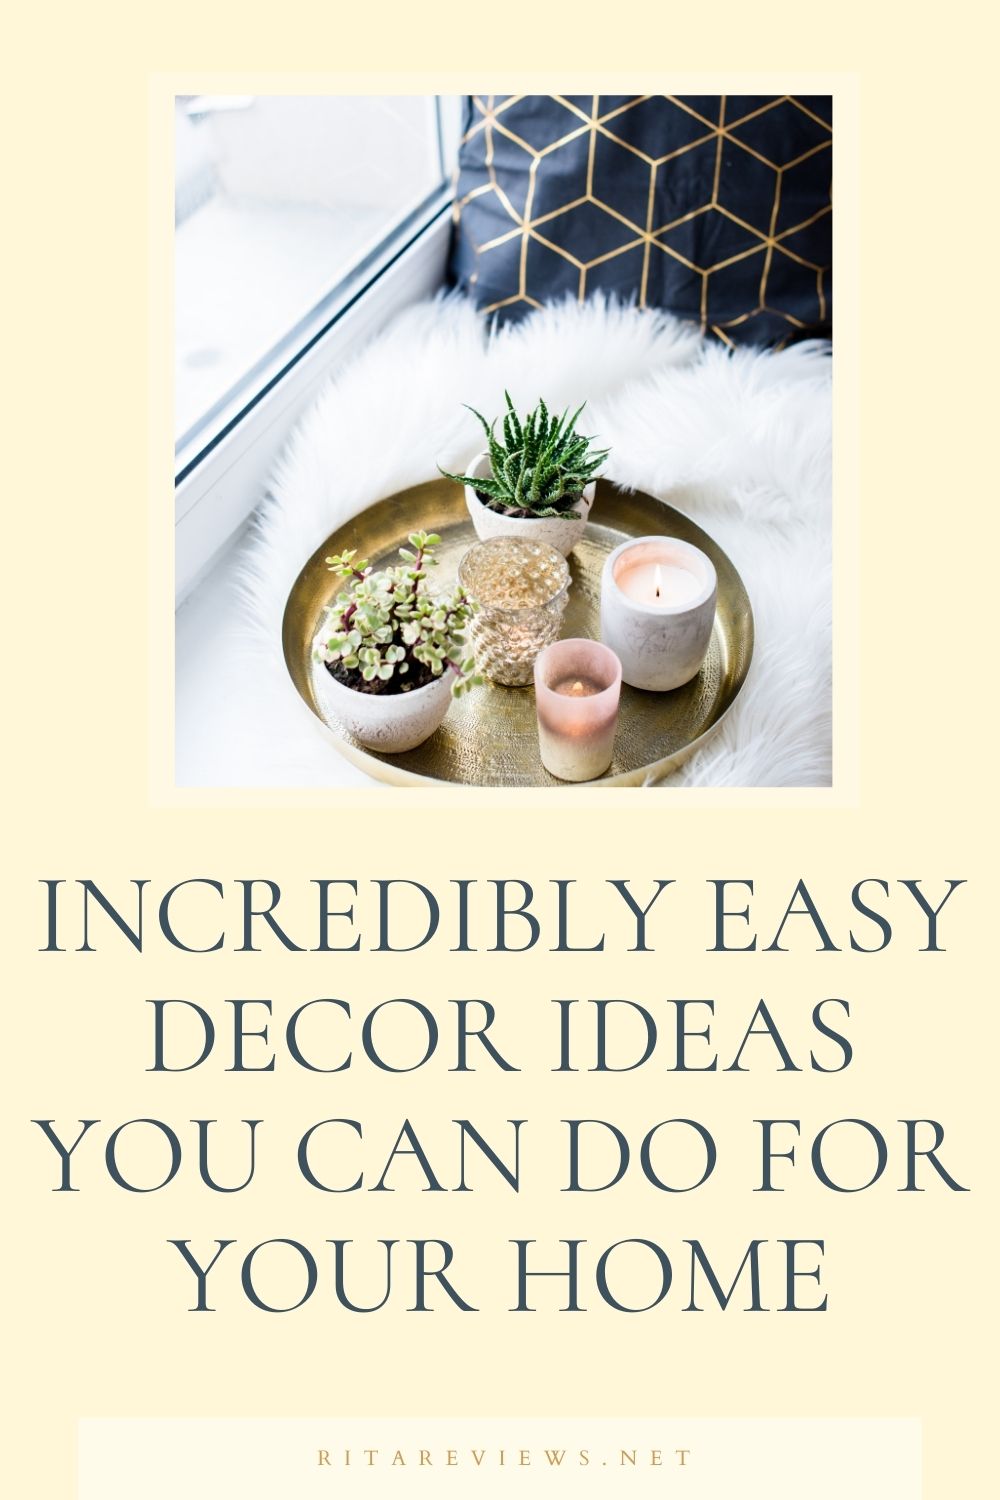 Incredibly Easy Decor Ideas You Can Do For Your Home